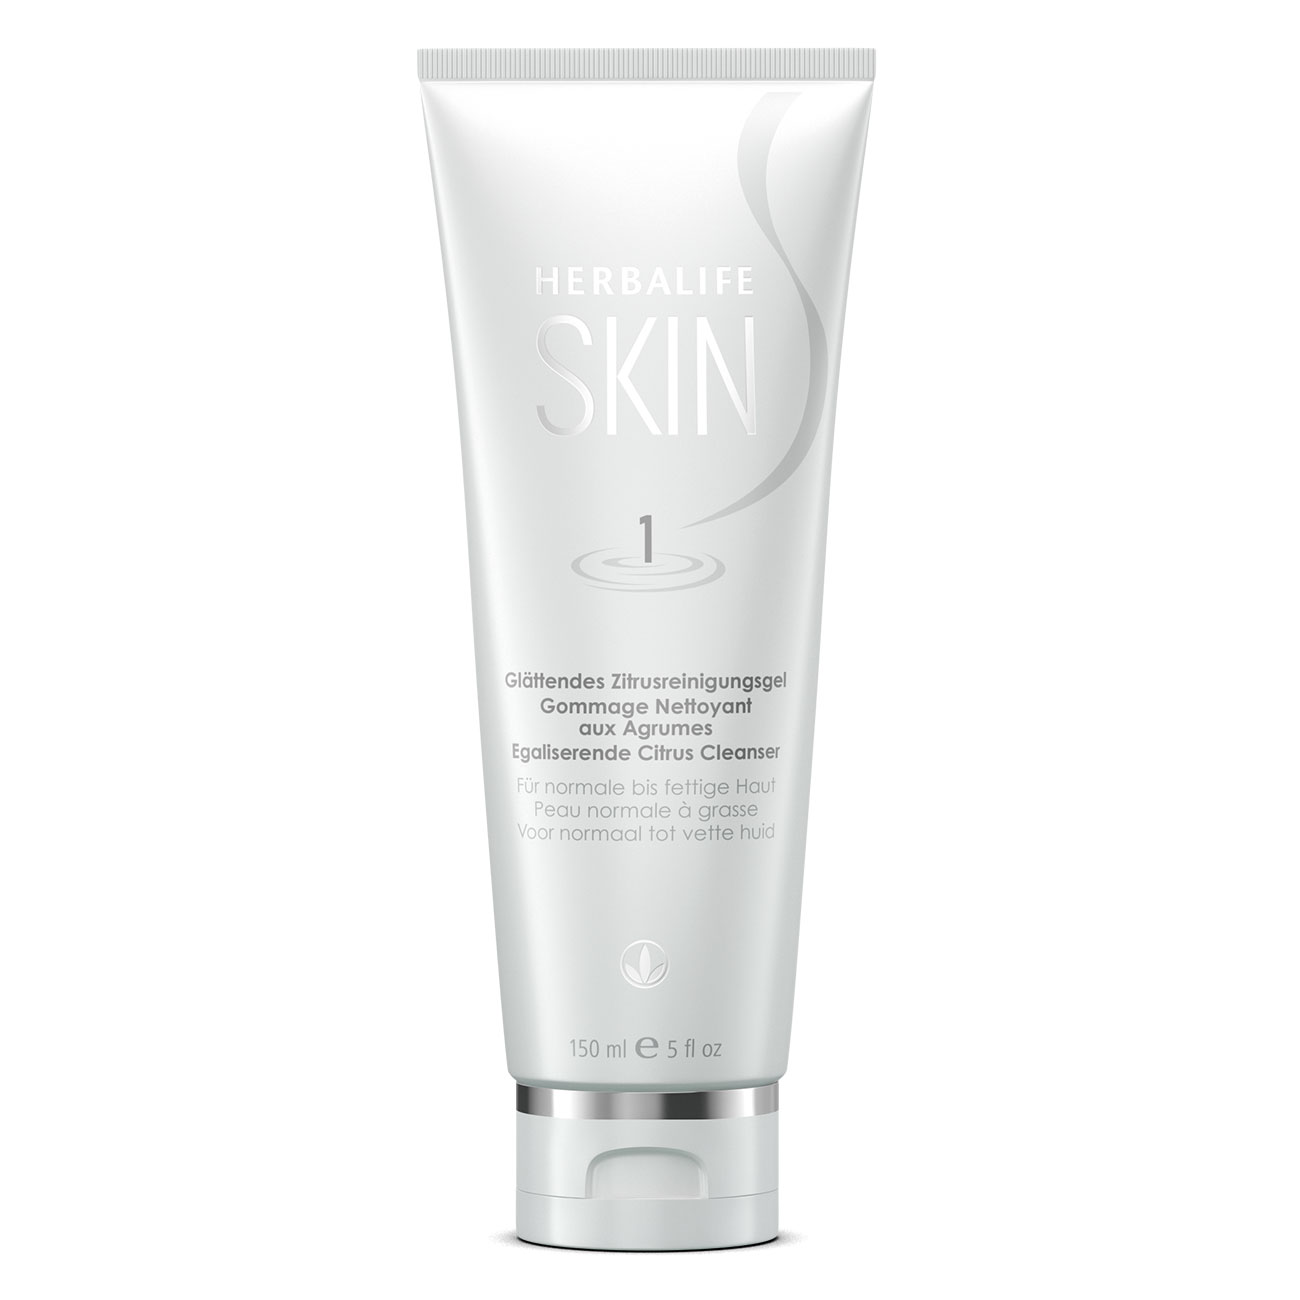 Smoothing cleanser